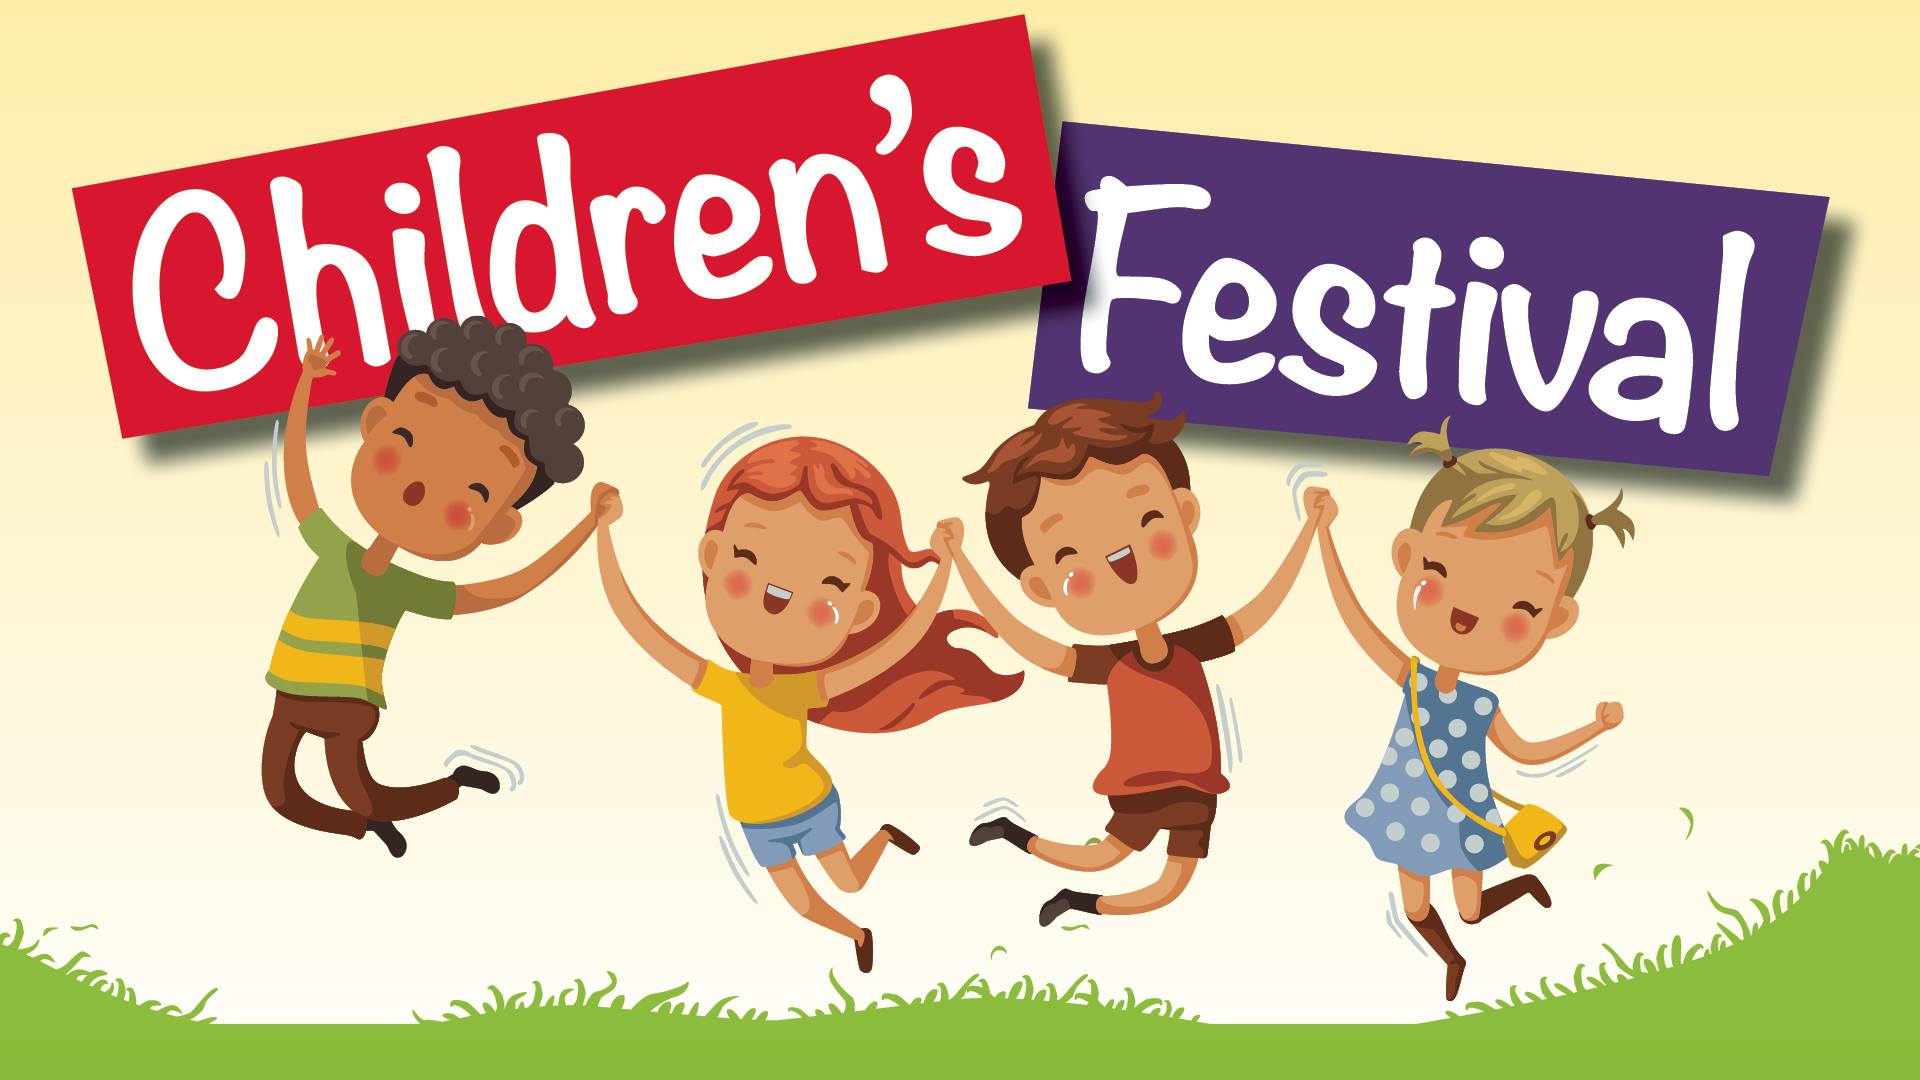 Free Children's Festival at Landstown Commons - MyActiveChild.com